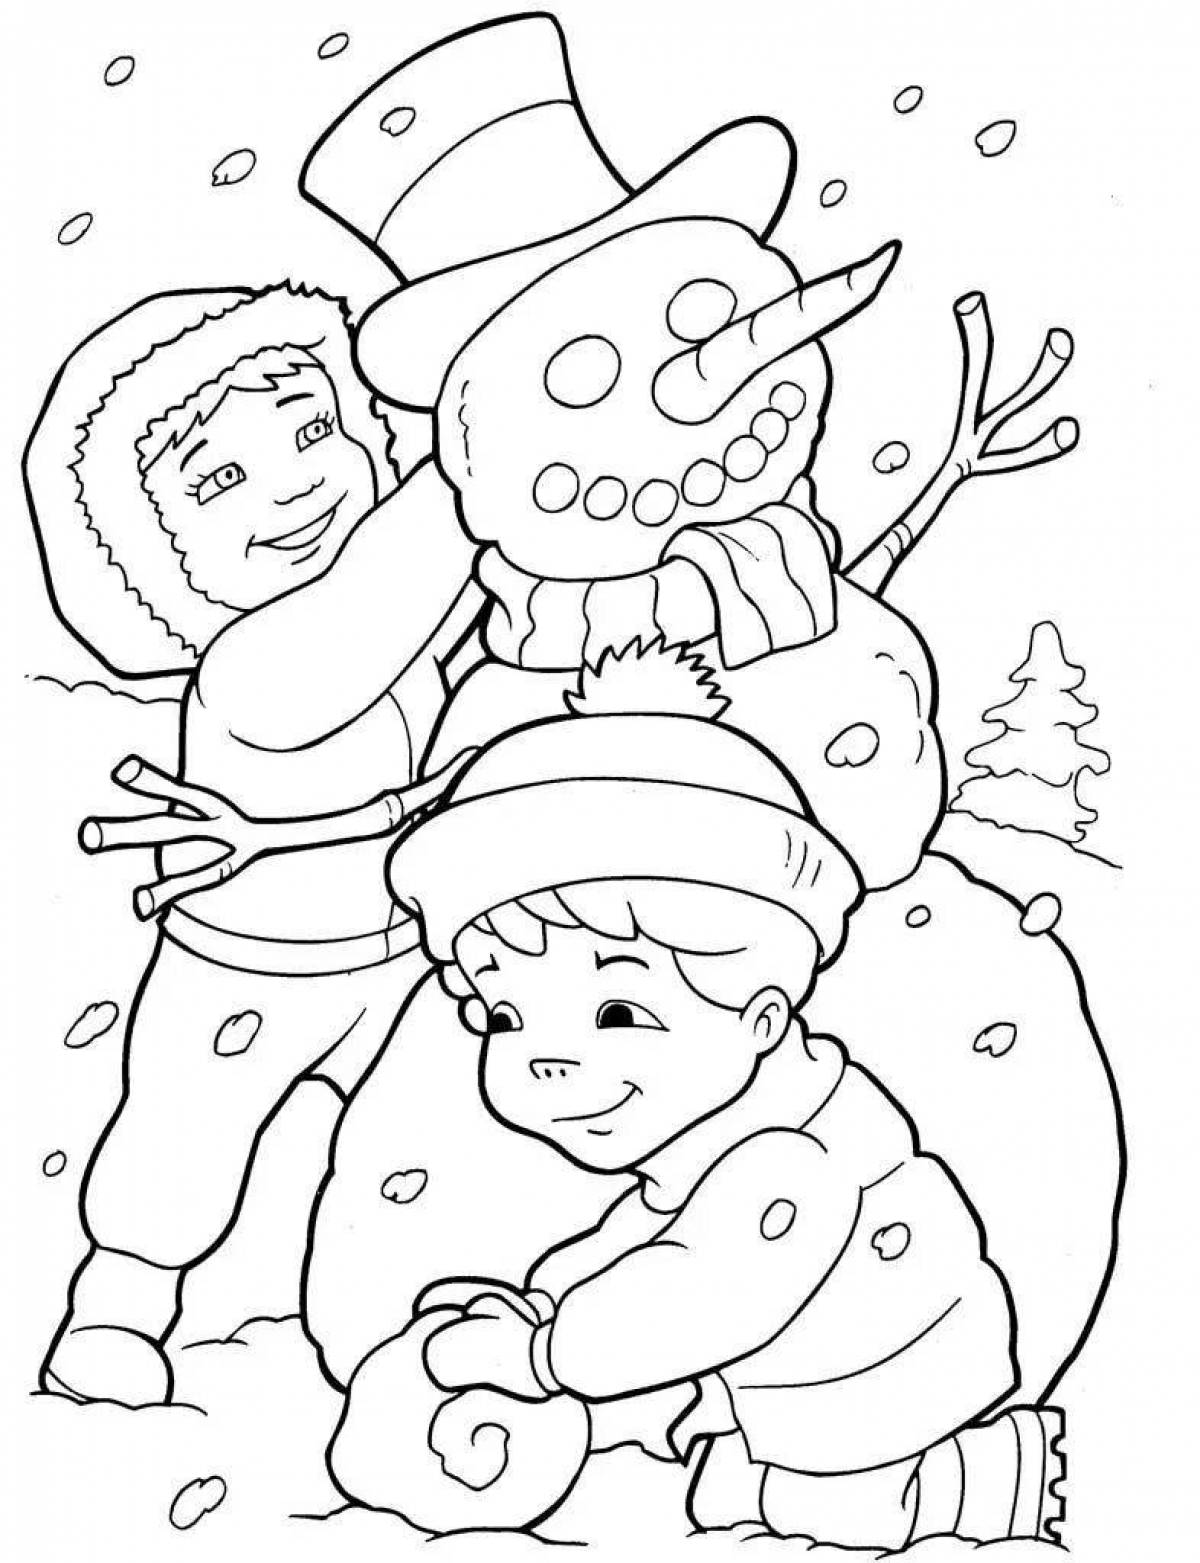 Colourful coloring for children winter activities